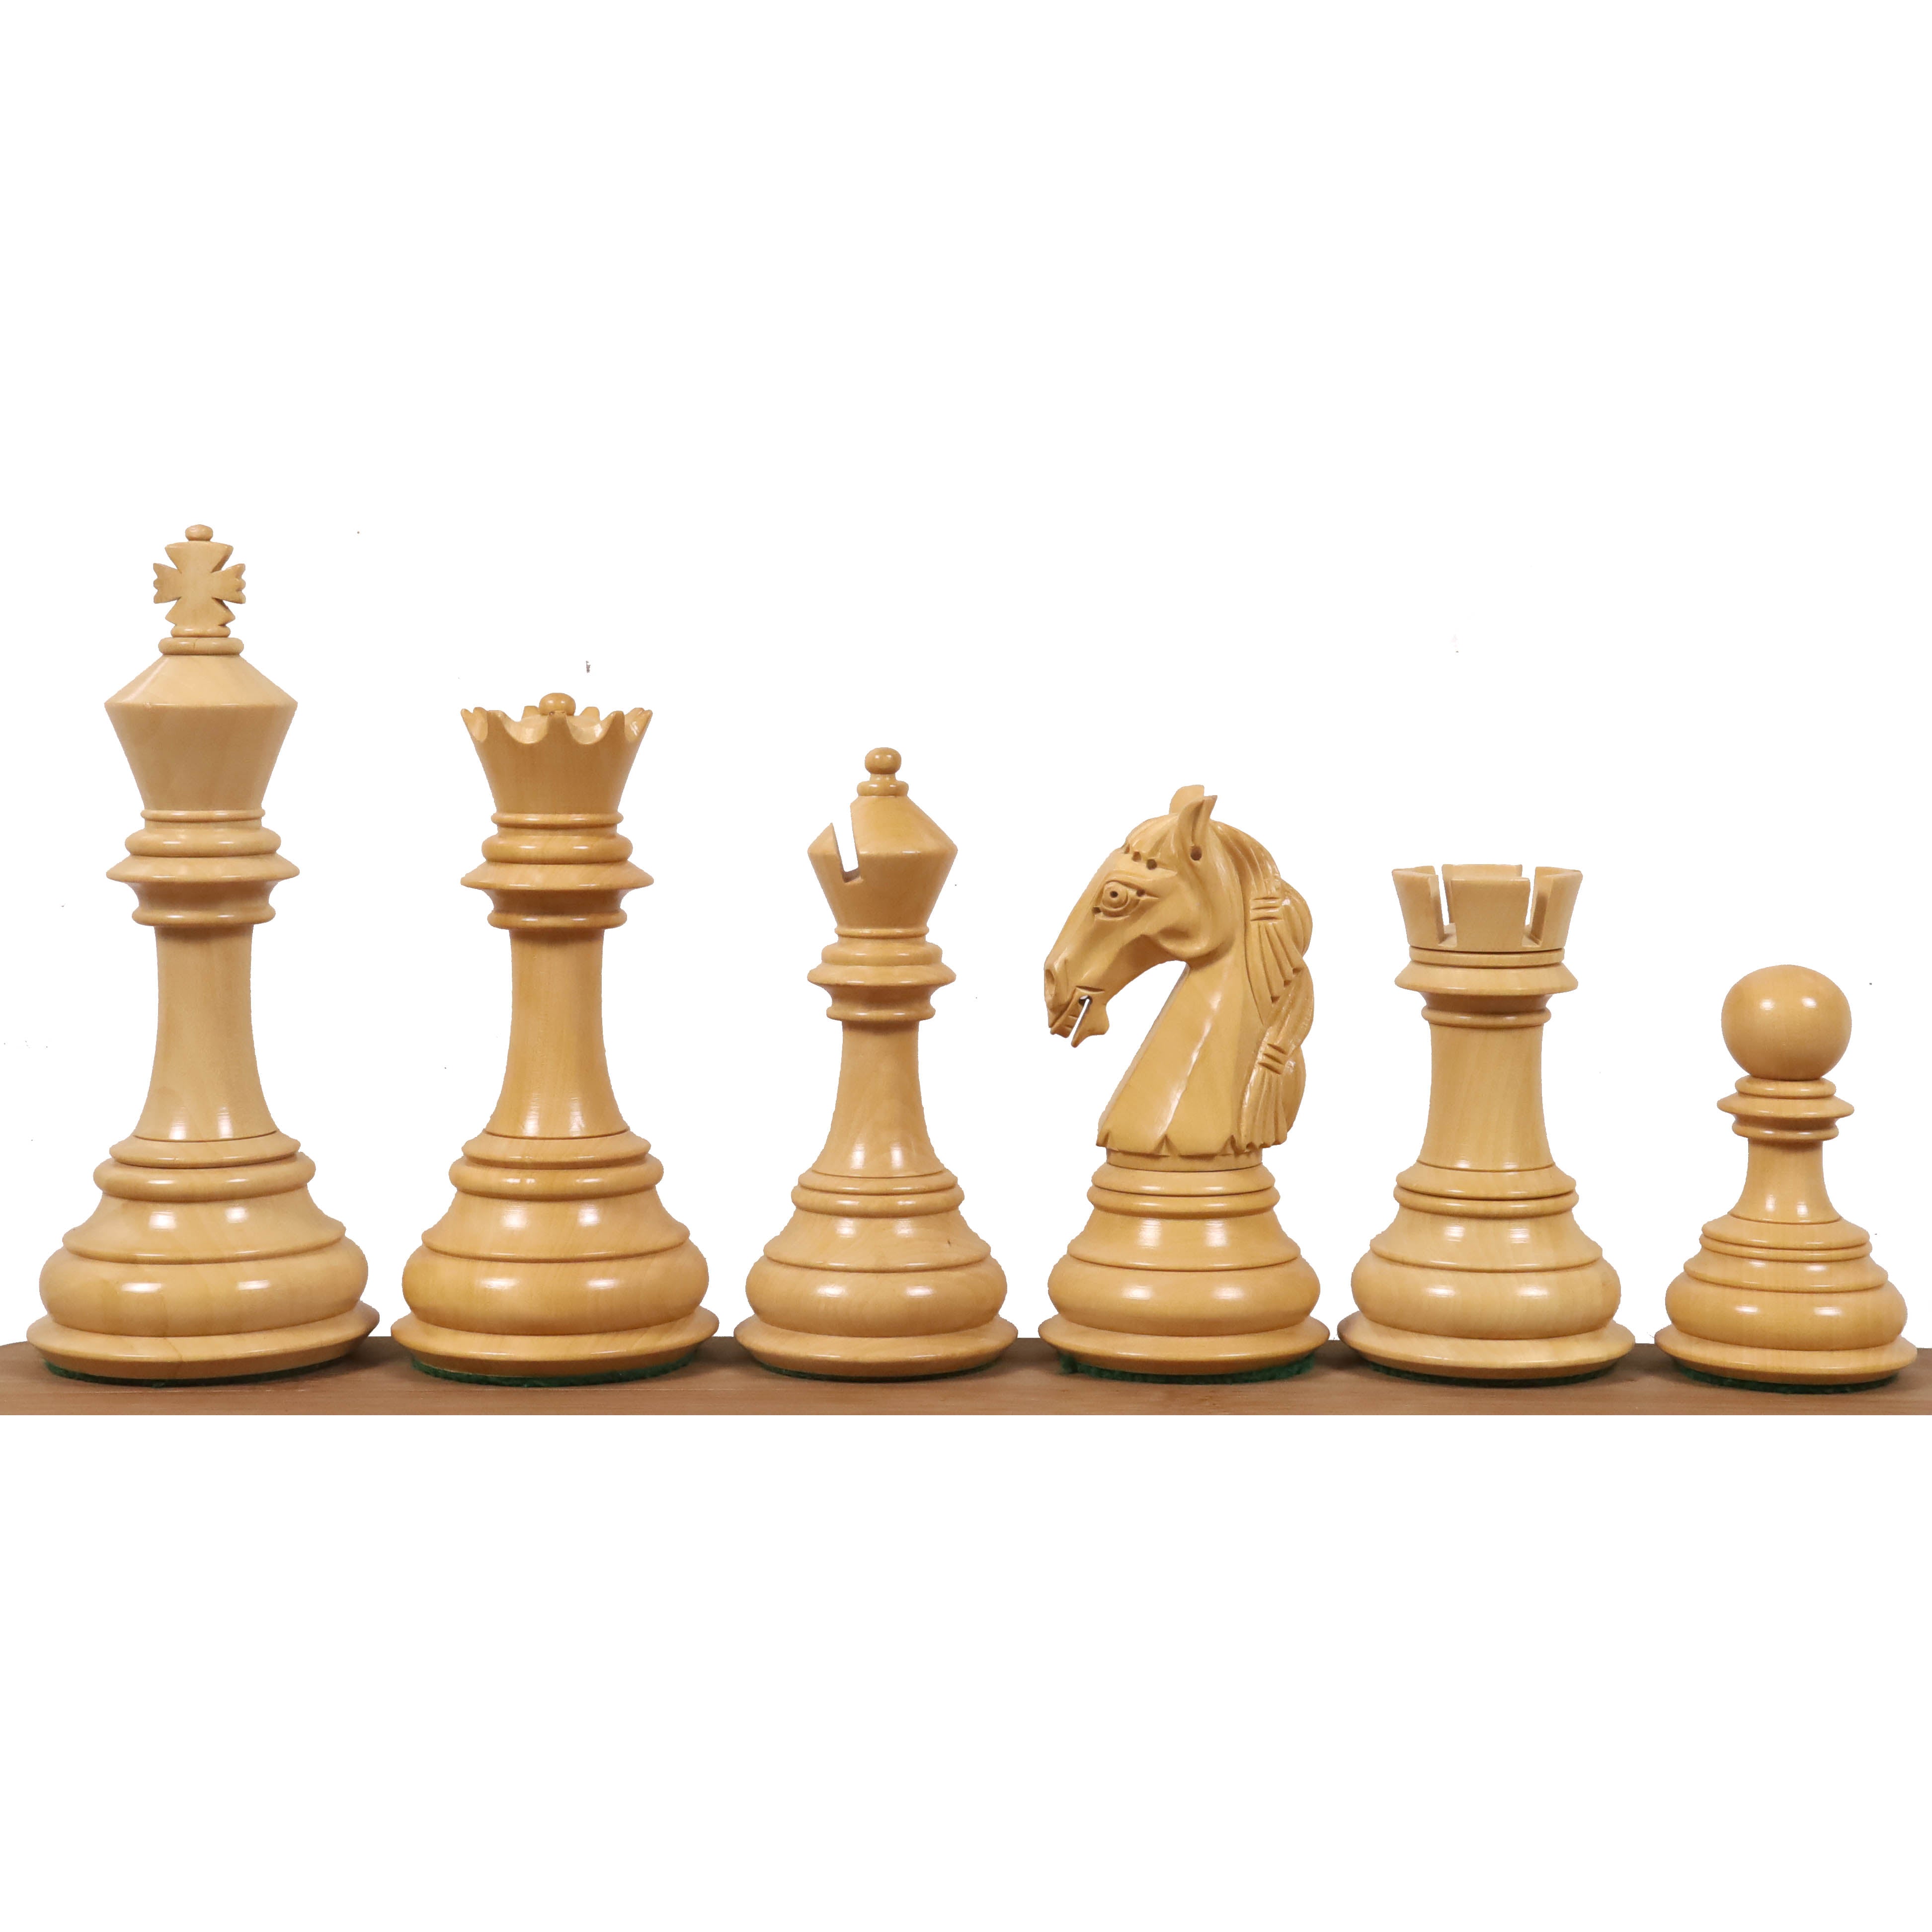 Rare Columbian Triple Weighted Luxury Chess Pieces Only Set